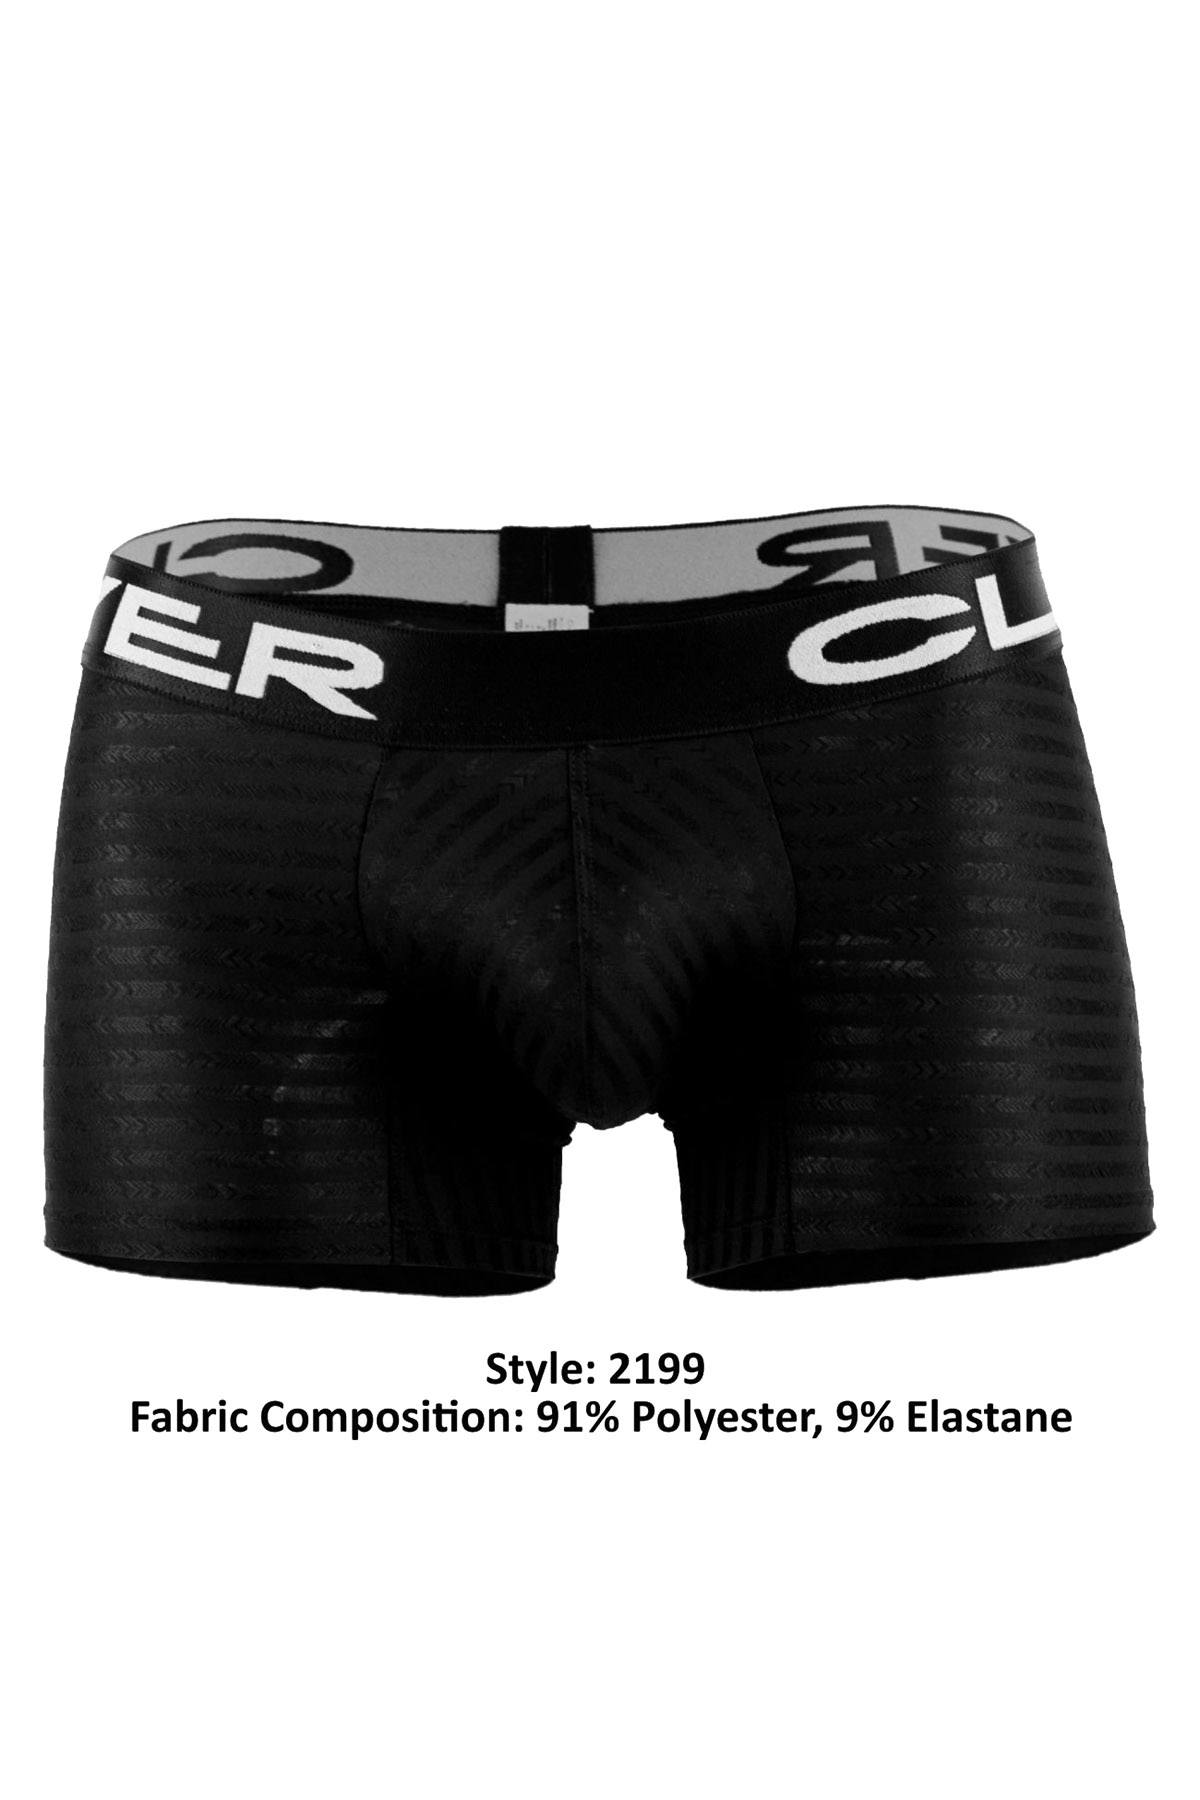 Clever Black Textured Stripe Limited Edition Trunk